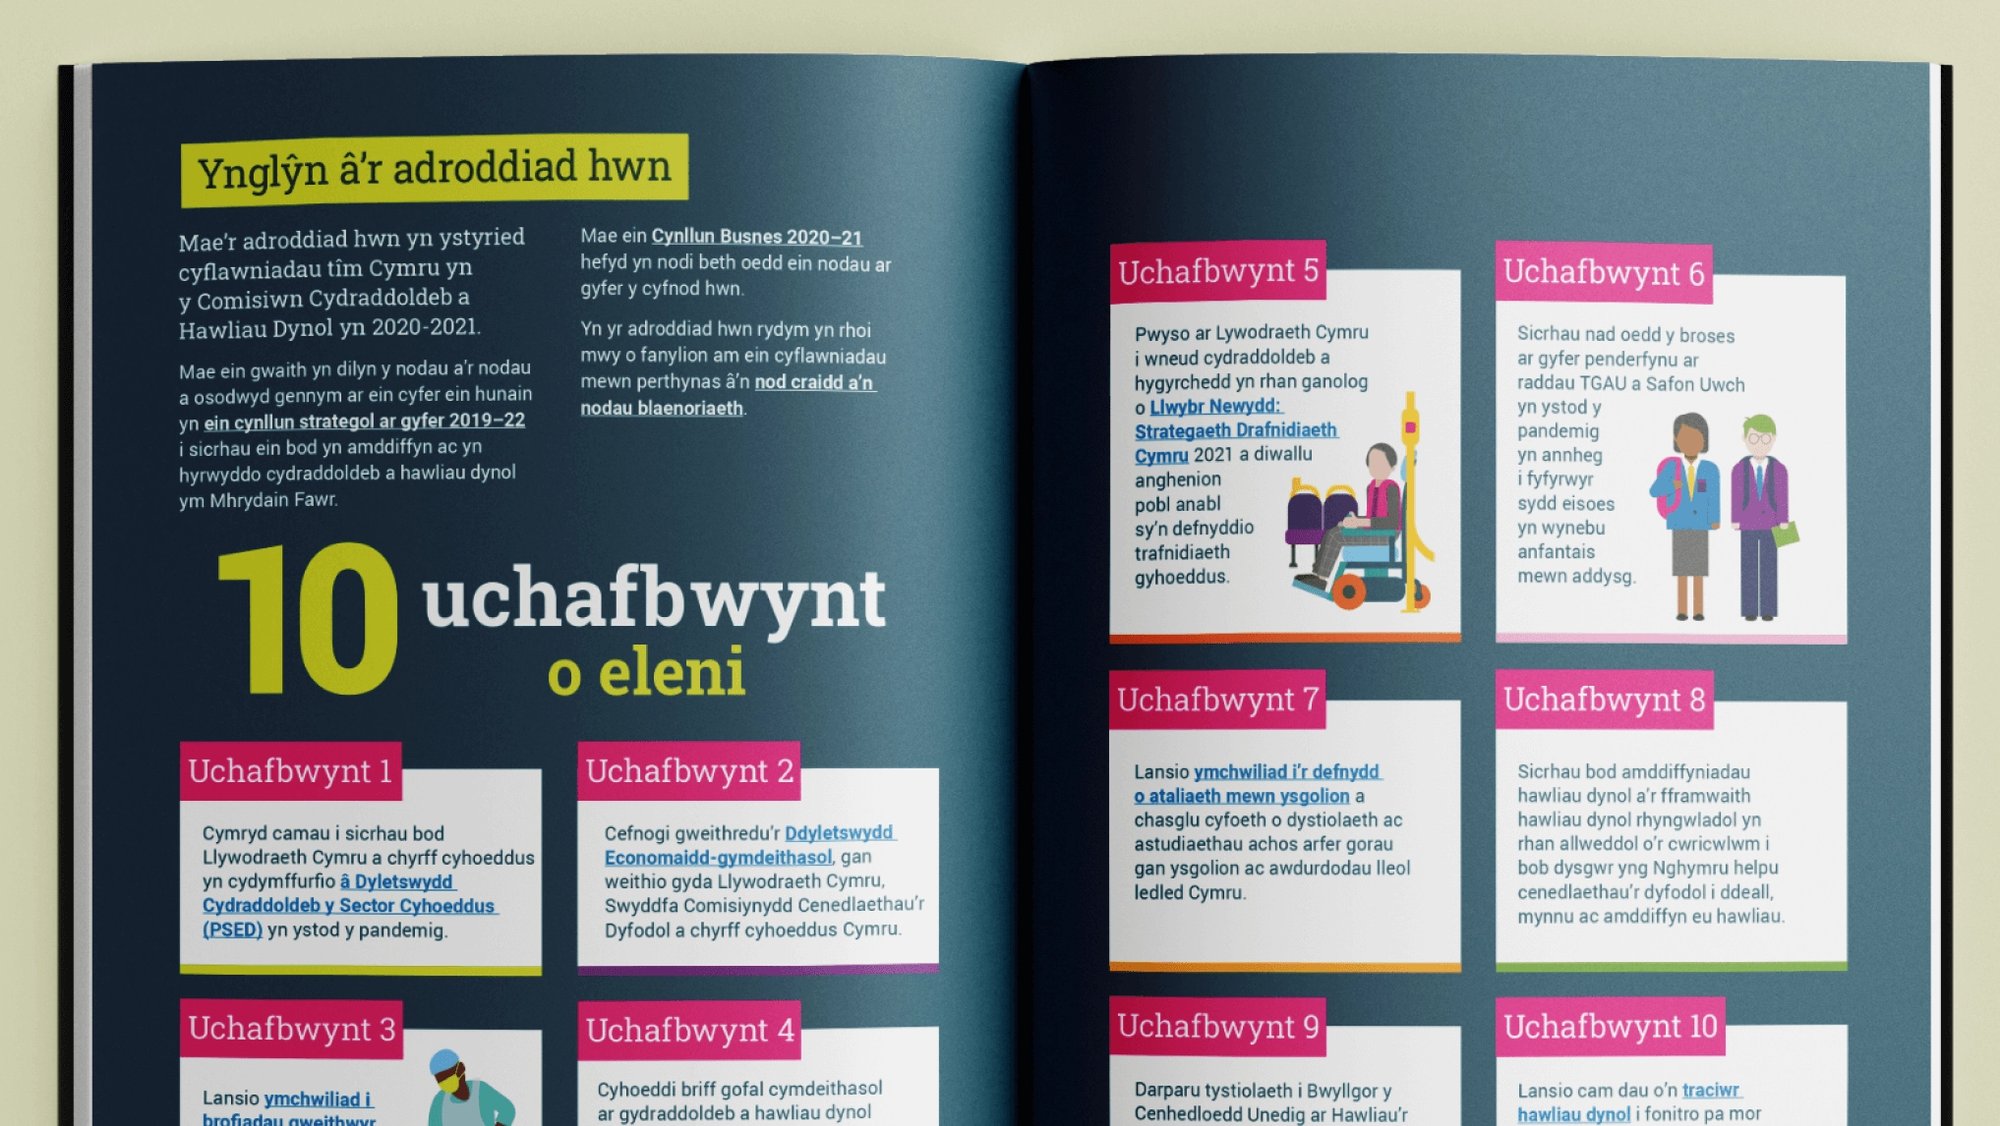 An inside spread of the welsh version of the report.